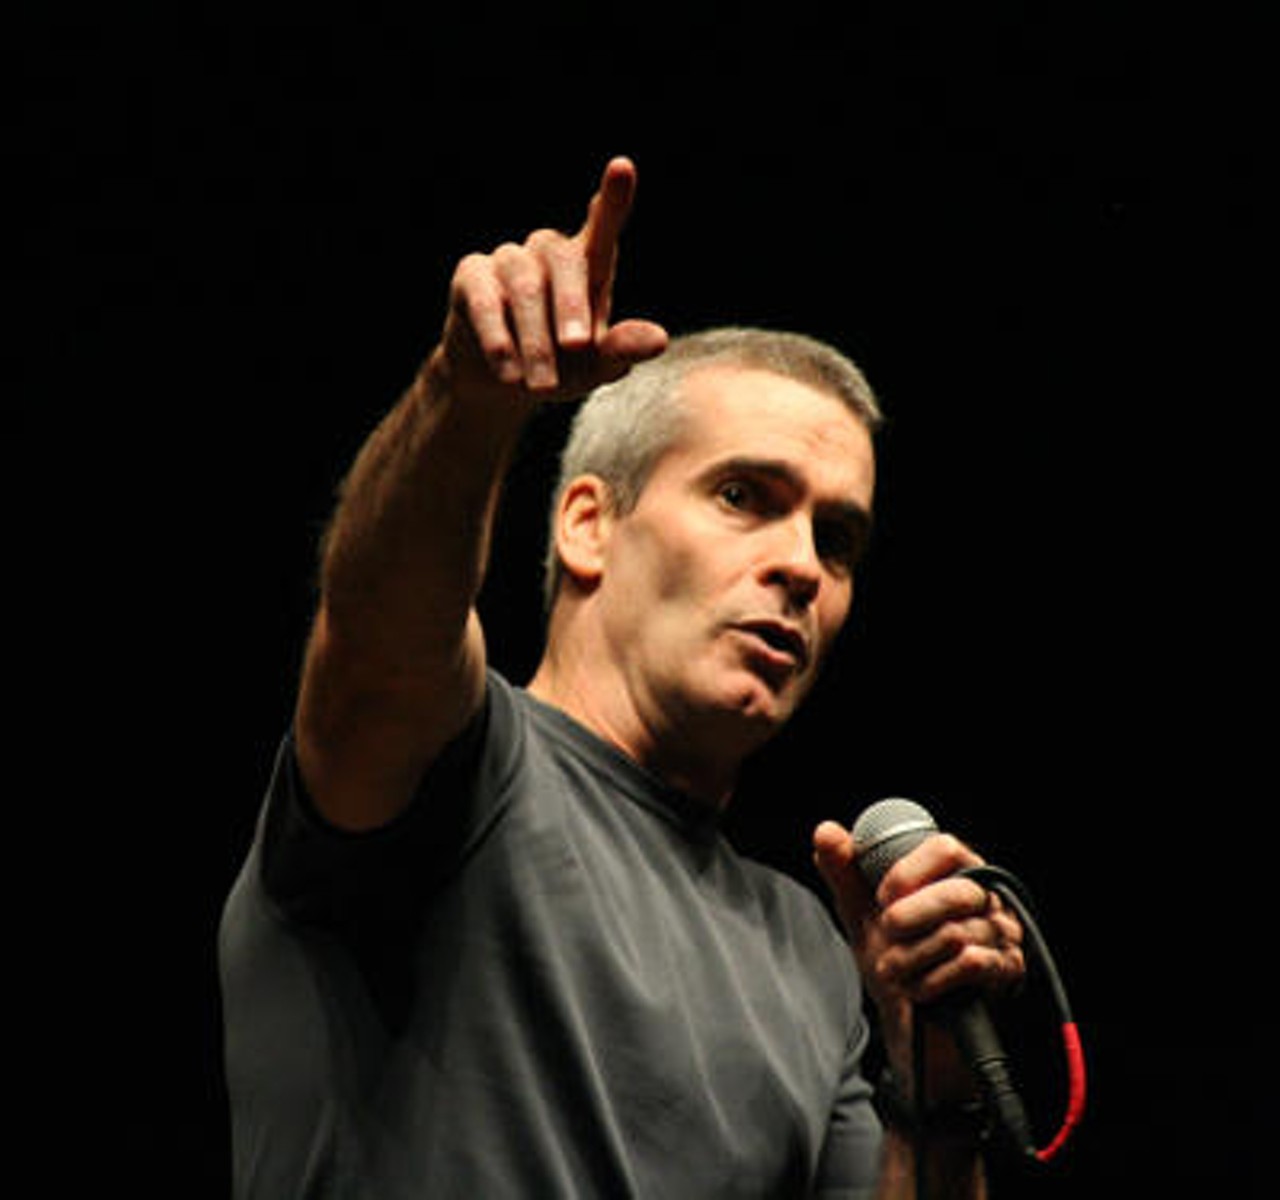 He's been on stage more than half his life, as a musician and spoken-word punk rock guru. Henry Rollins was at the Pageant on November 6. Look at the Many Faces of Henry Rollins and read a review of his show.